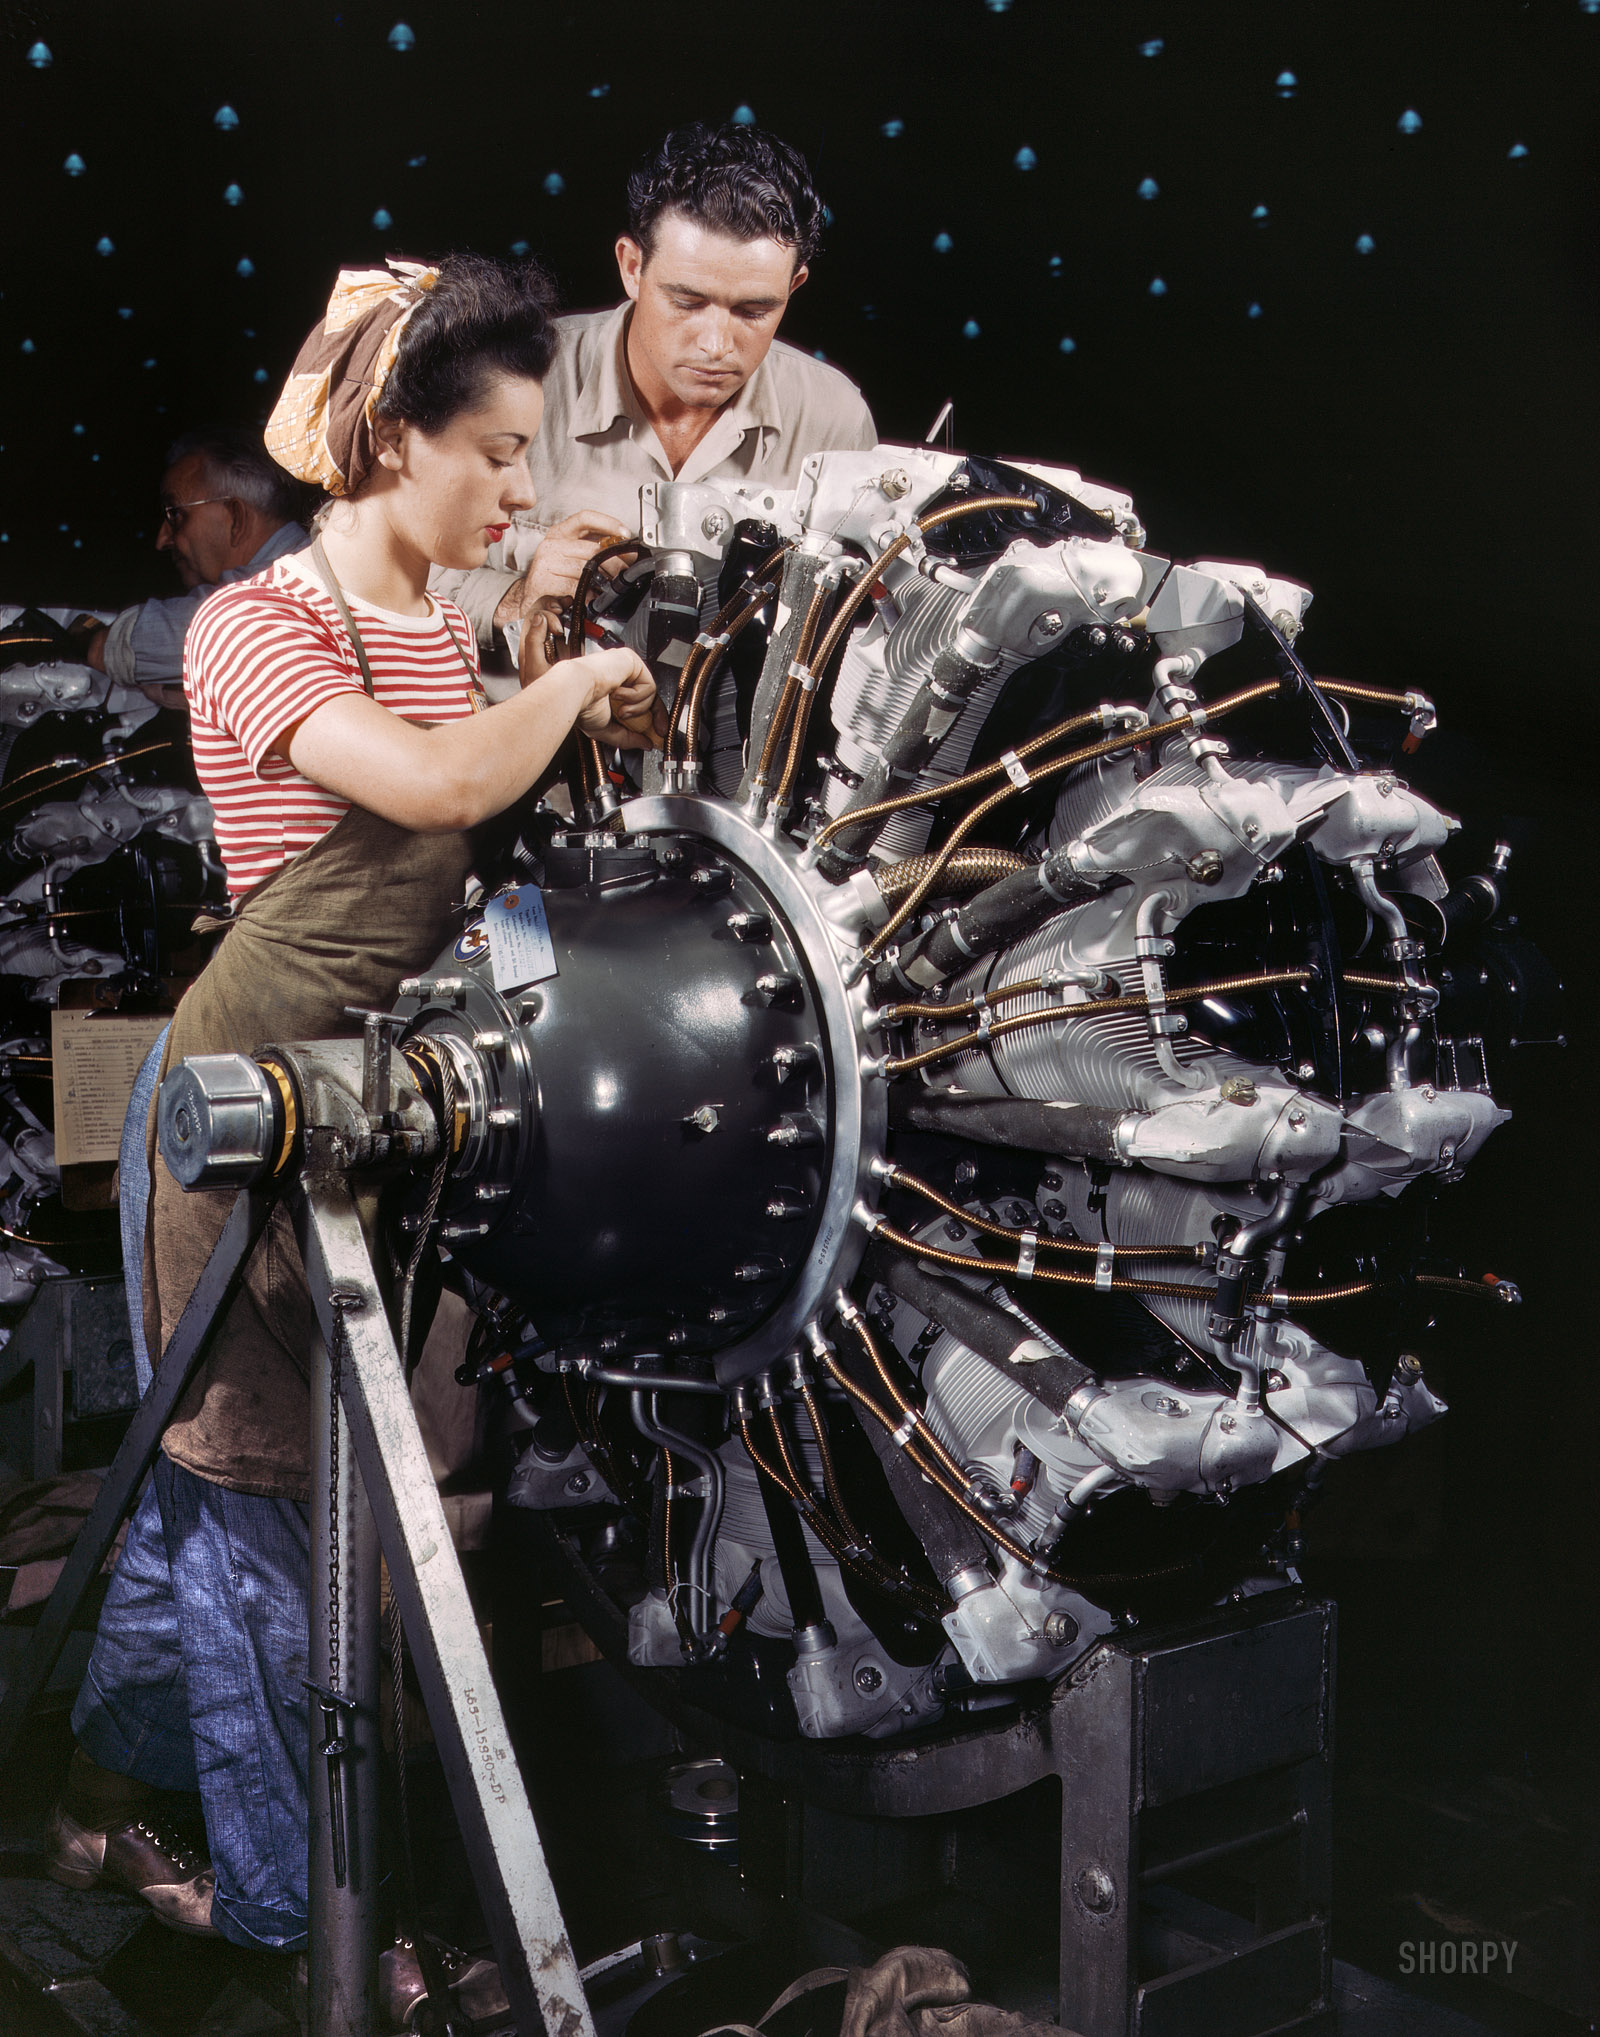 October 1942. "Women are trained as engine mechanics in thorough Douglas training methods. Douglas Aircraft Company, Long Beach, California." Skipping ahead to 2009, and the end of an era: Today Kodak announced that, after 74 colorful years, it will stop making Kodachrome film. 4x5 Kodachrome transparency by Alfred Palmer, Office of War Information. View full size.